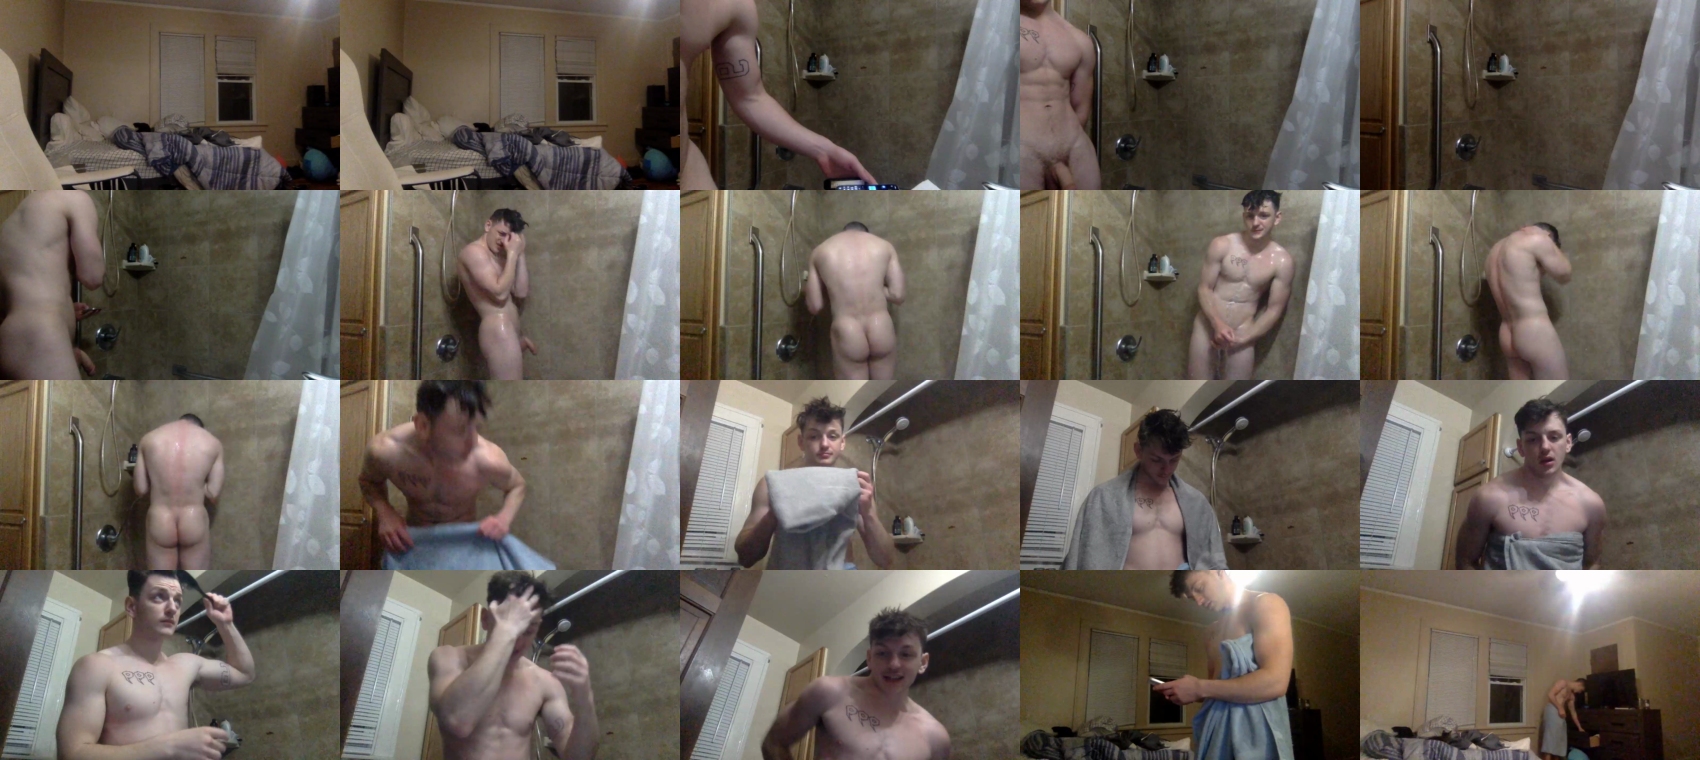 sexylax69 sexybody CAM SHOW @ Chaturbate 01-05-2022